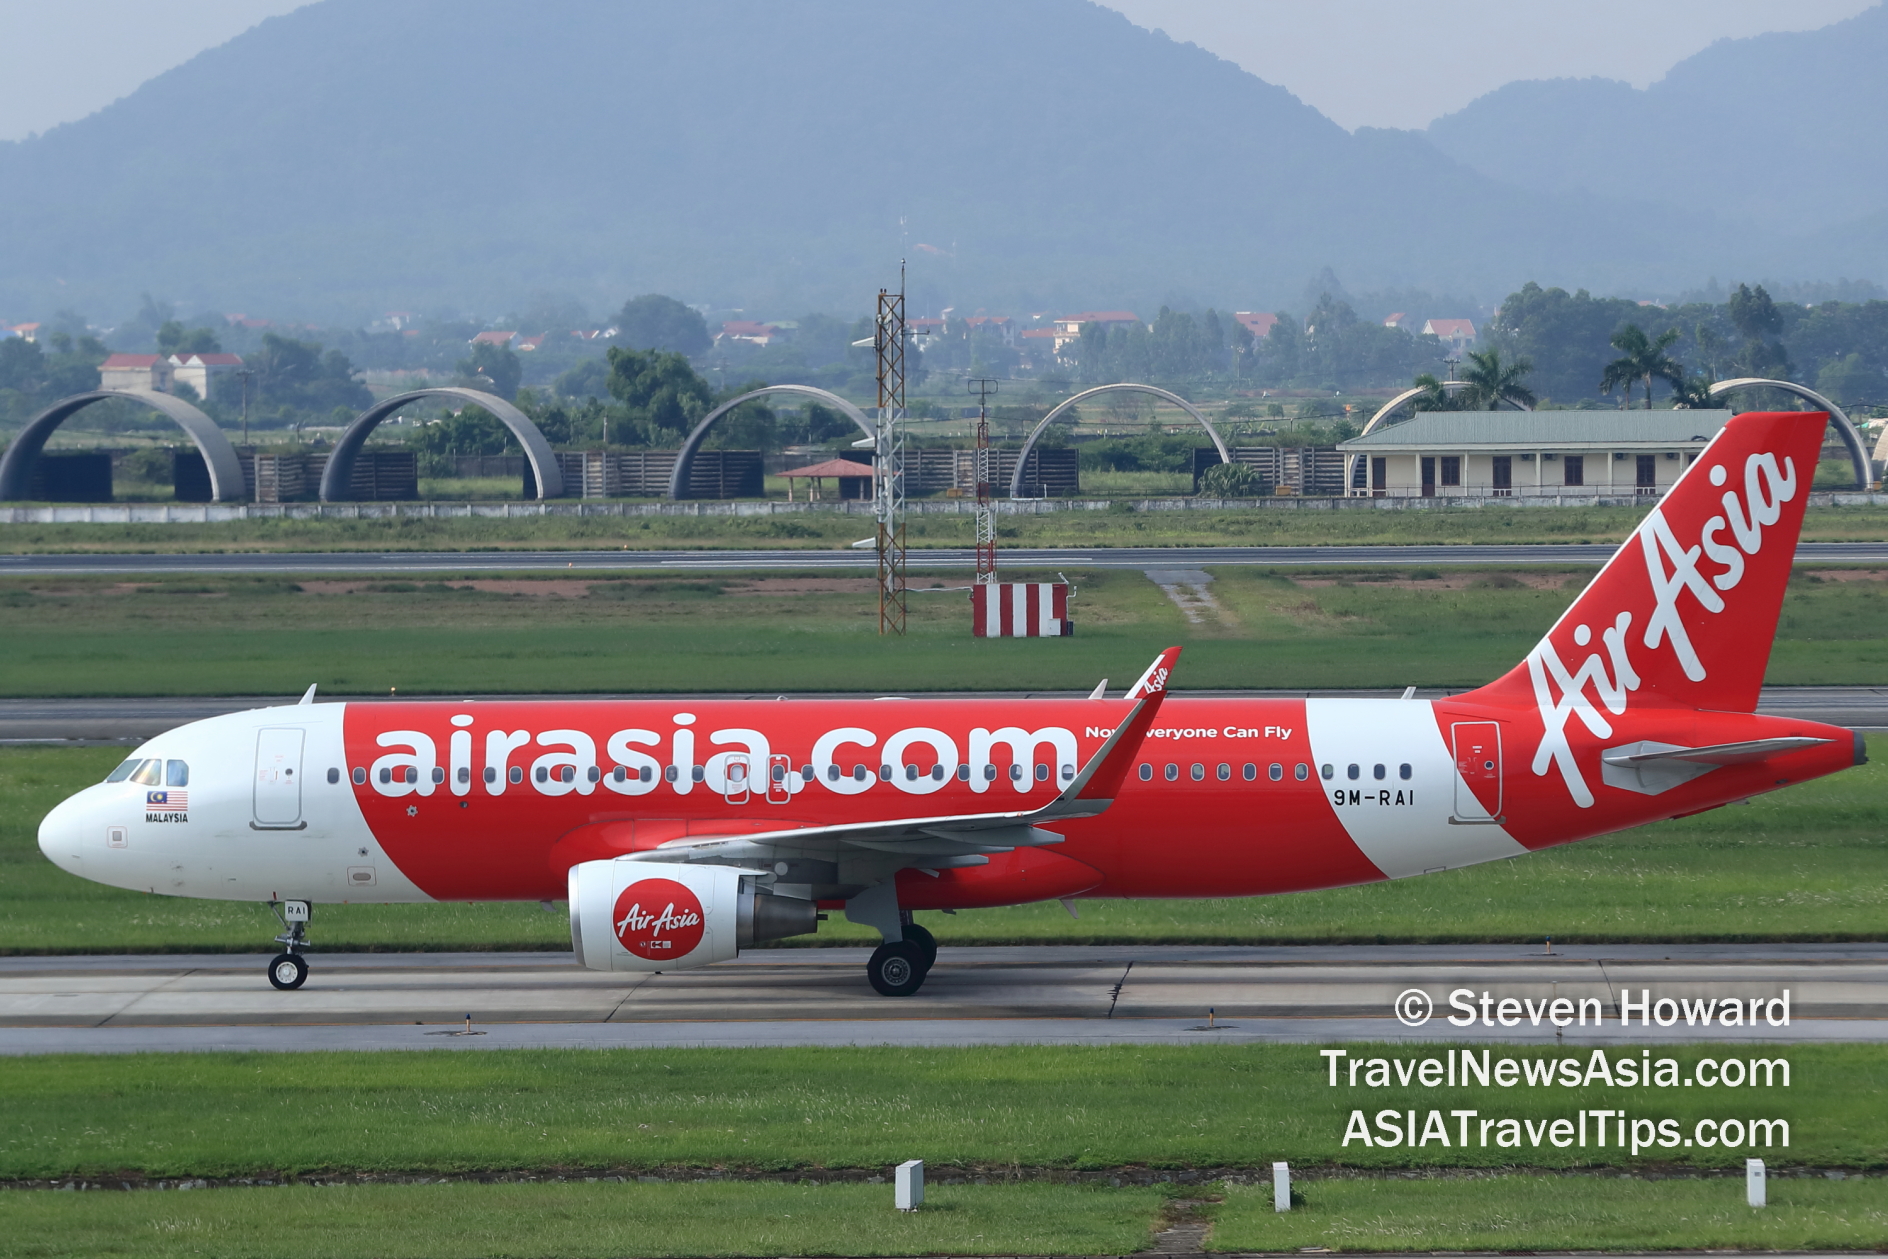 AirAsia Airbus A320 reg: 9M-RAI. Picture by Steven Howard of TravelNewsAsia.com. Click to enlarge.